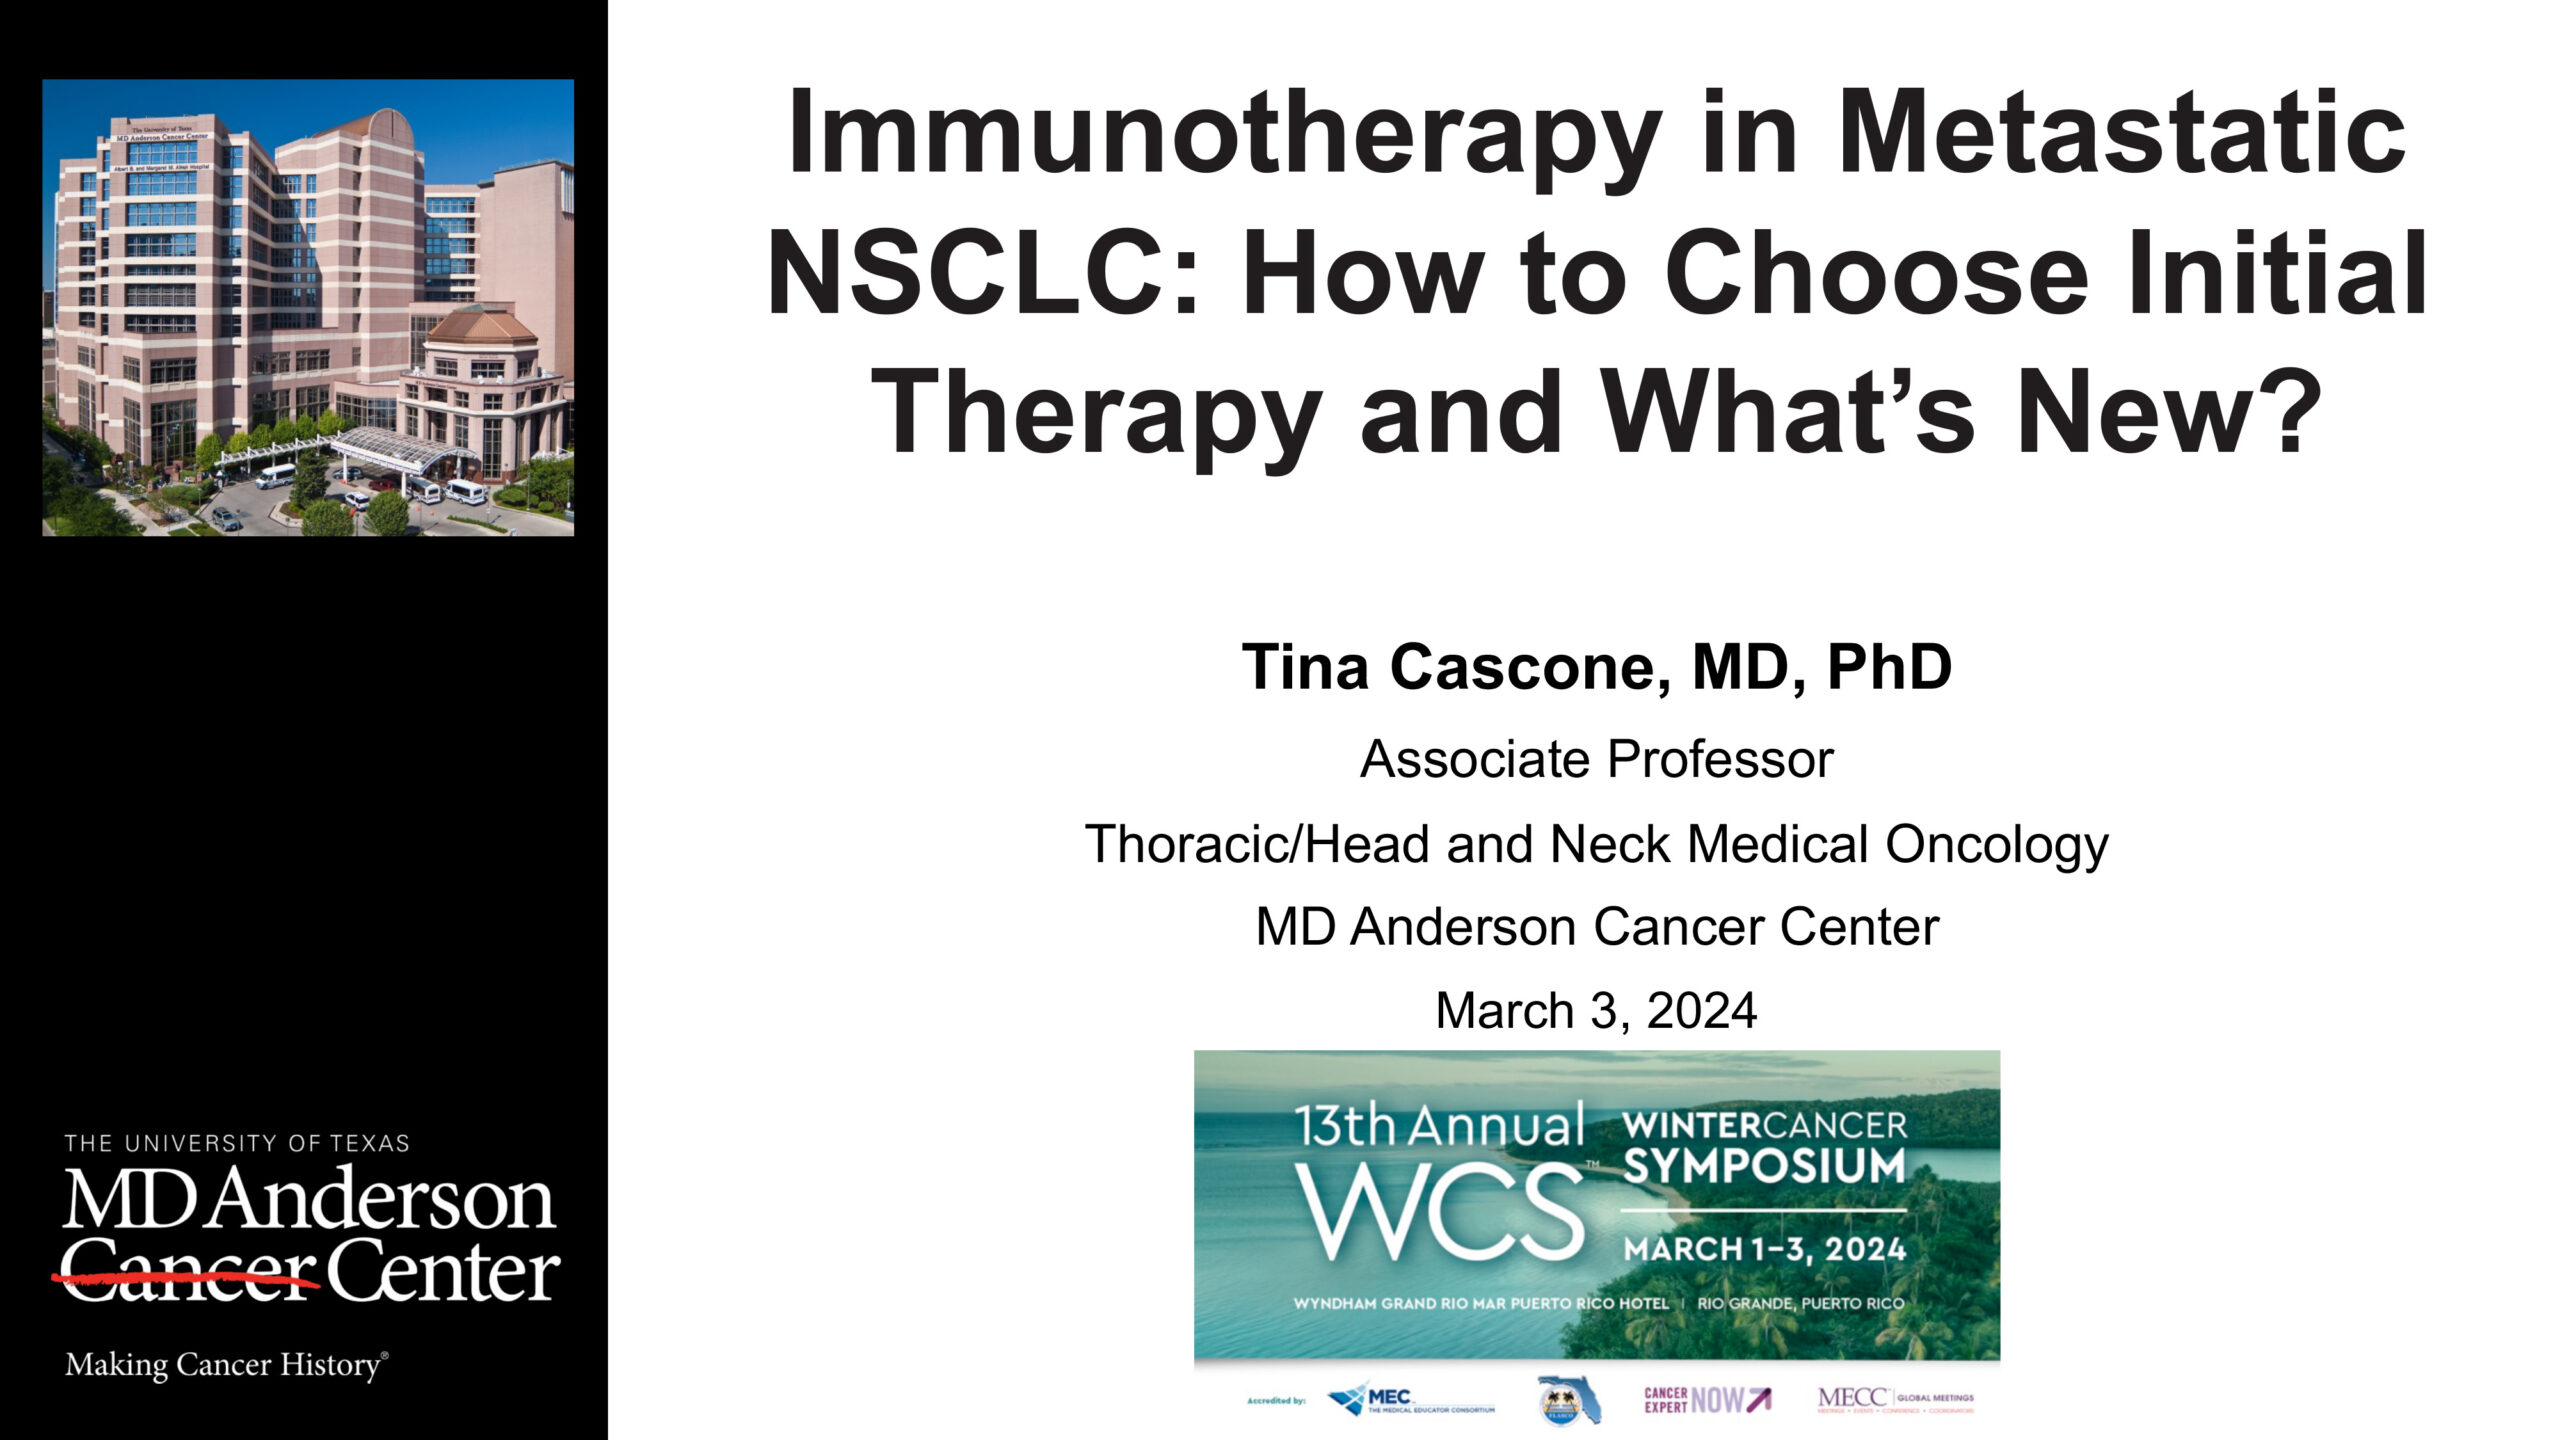 Immunotherapy in Metastatic NSCLC: How to Choose Initial Therapy and What’s New?